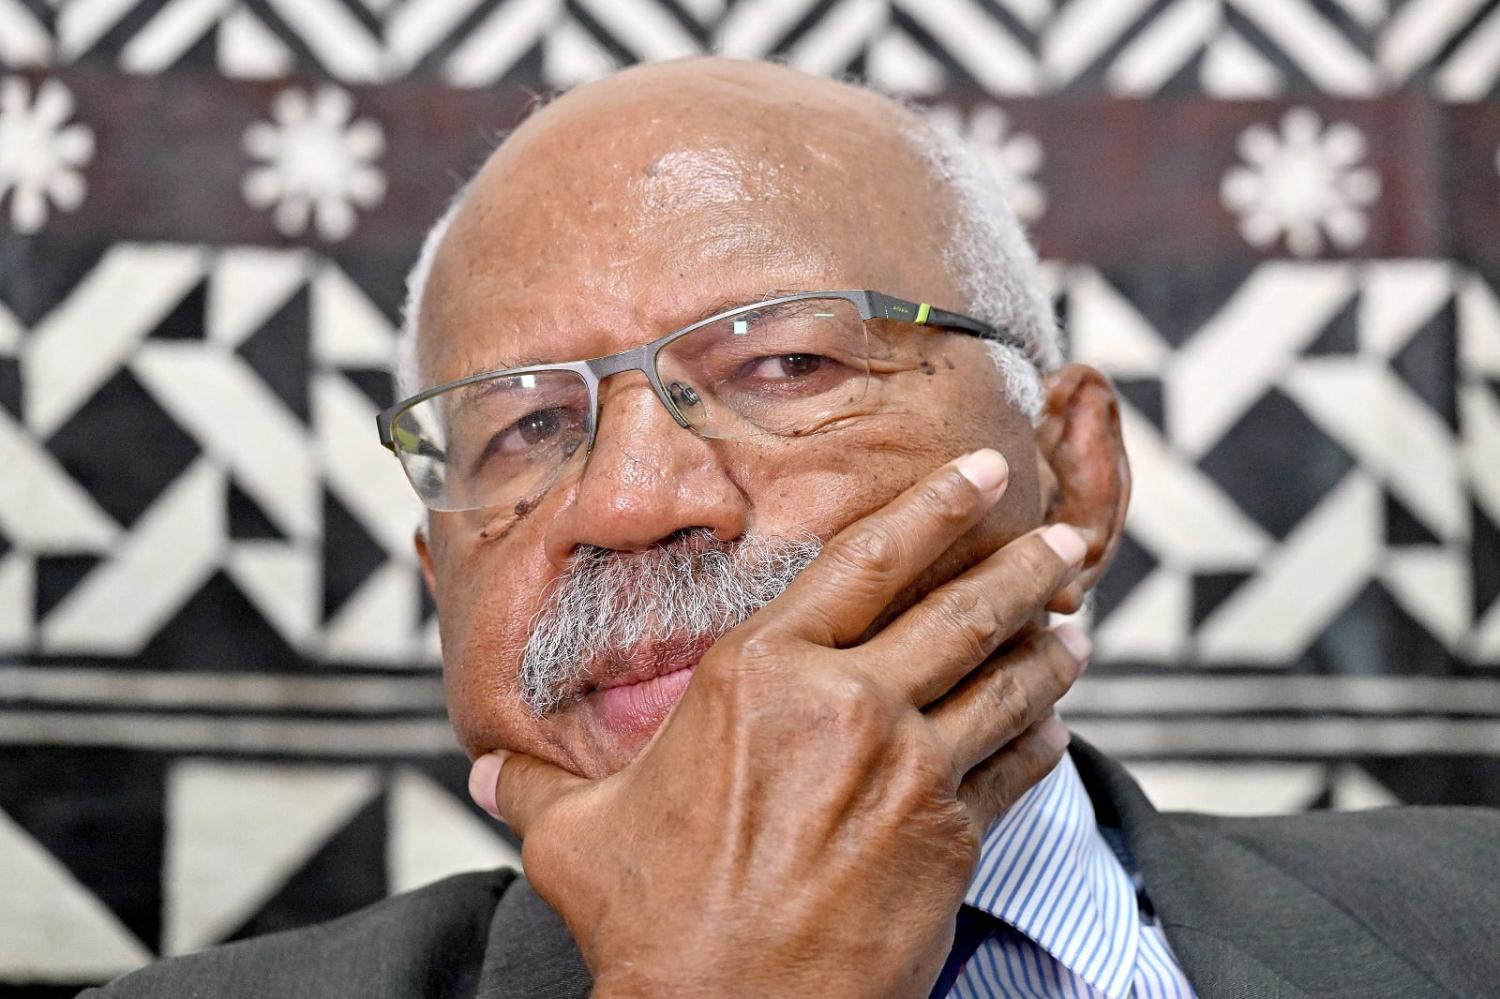 People’s Alliance Party leader Sitiveni Rabuka speaks at a press conference after securing support from SODELPA to form government, 20 December 2022 (Saeed Khan/AFP via Getty Images)